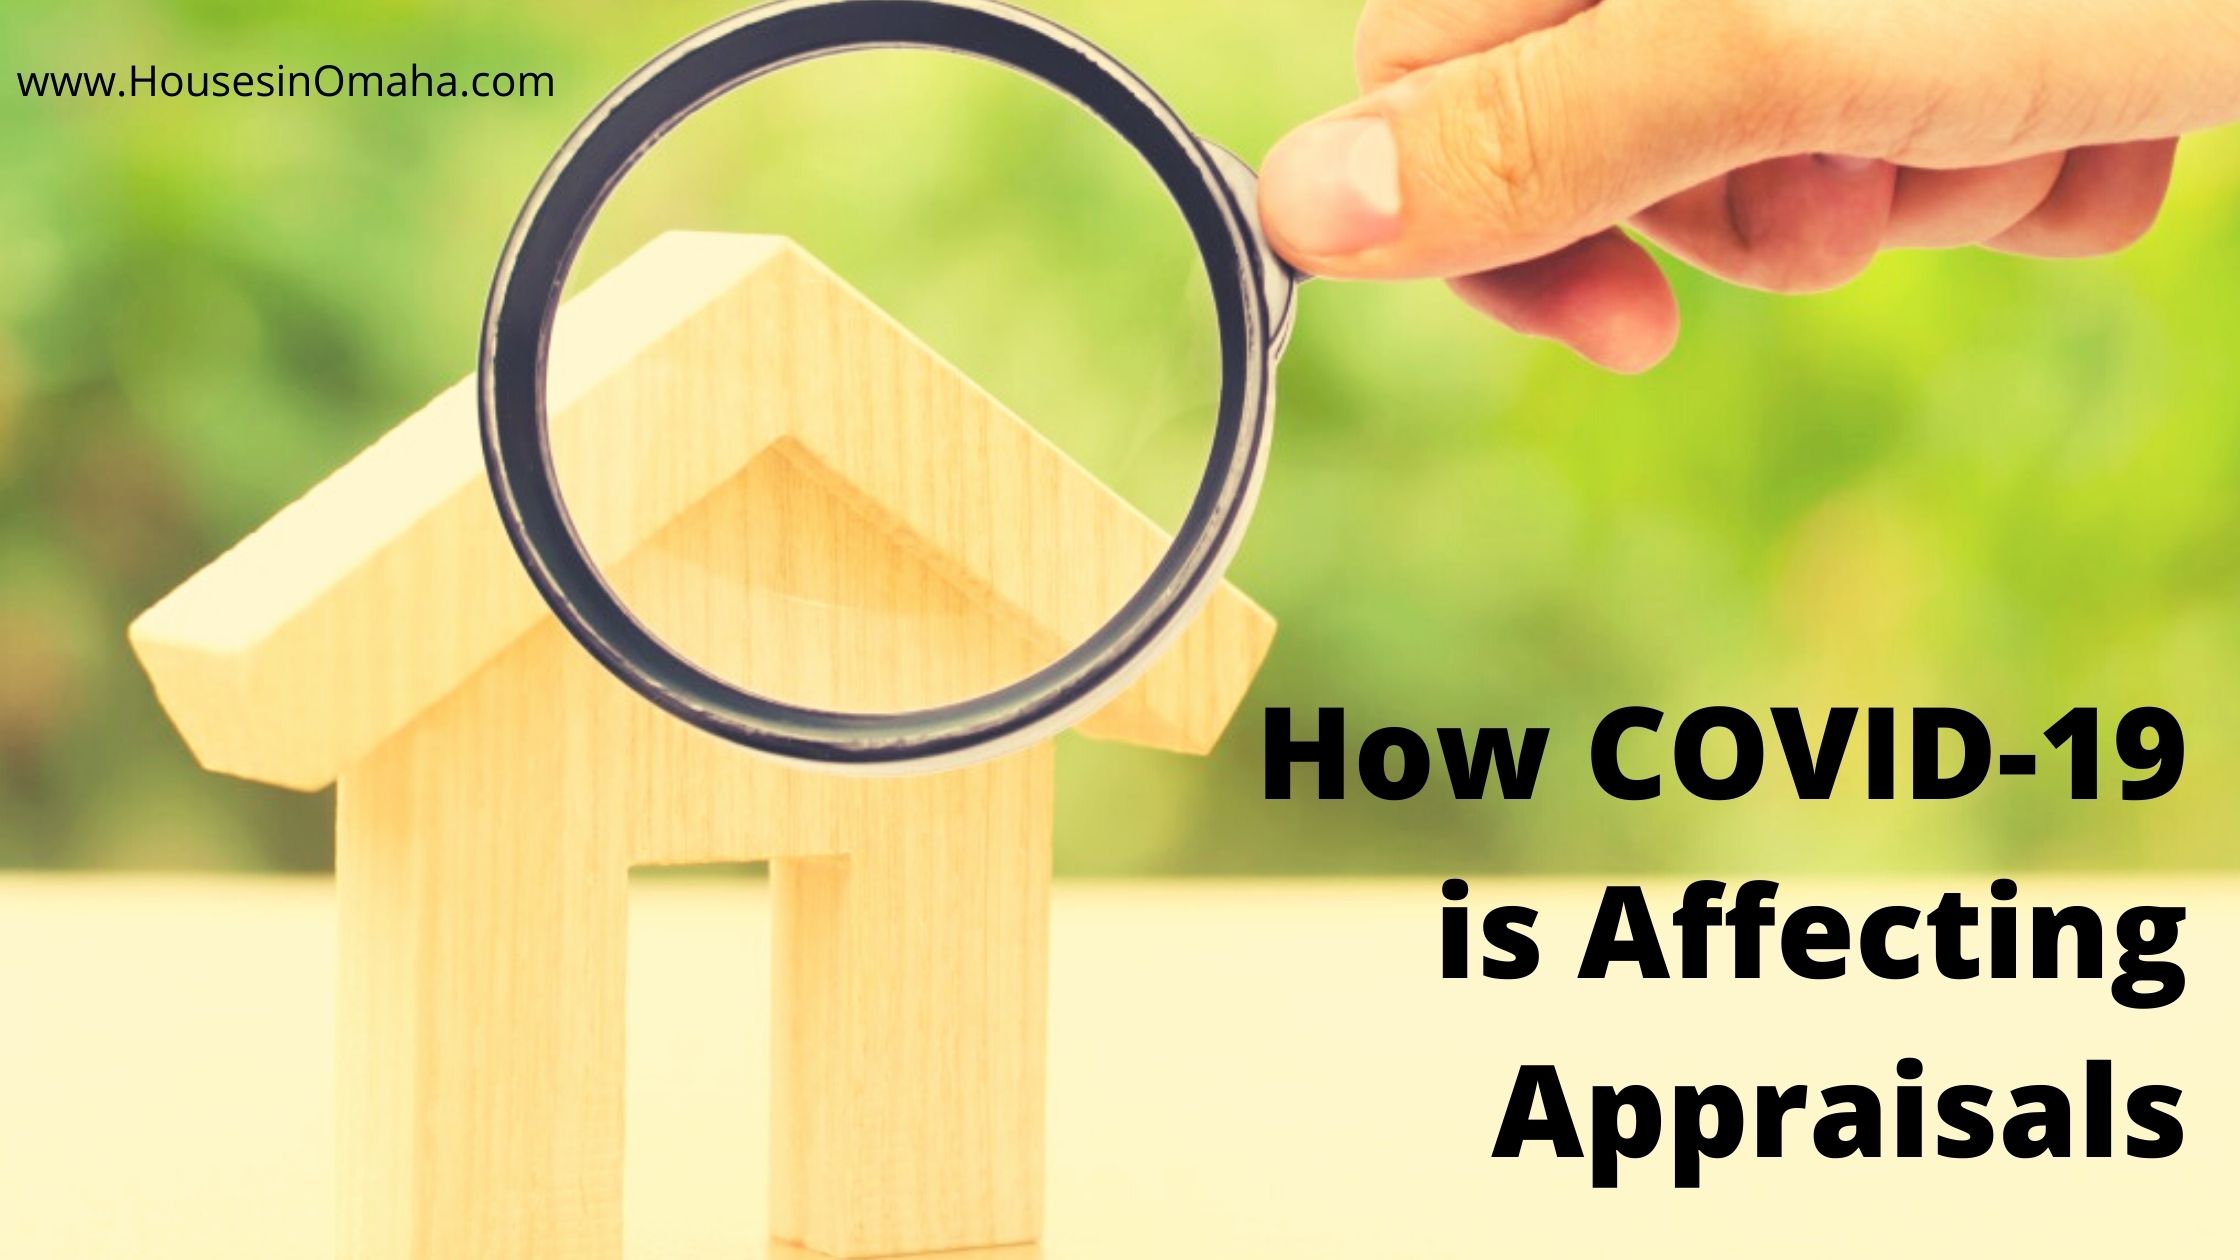 How COVID-19 is Affecting Appraisals